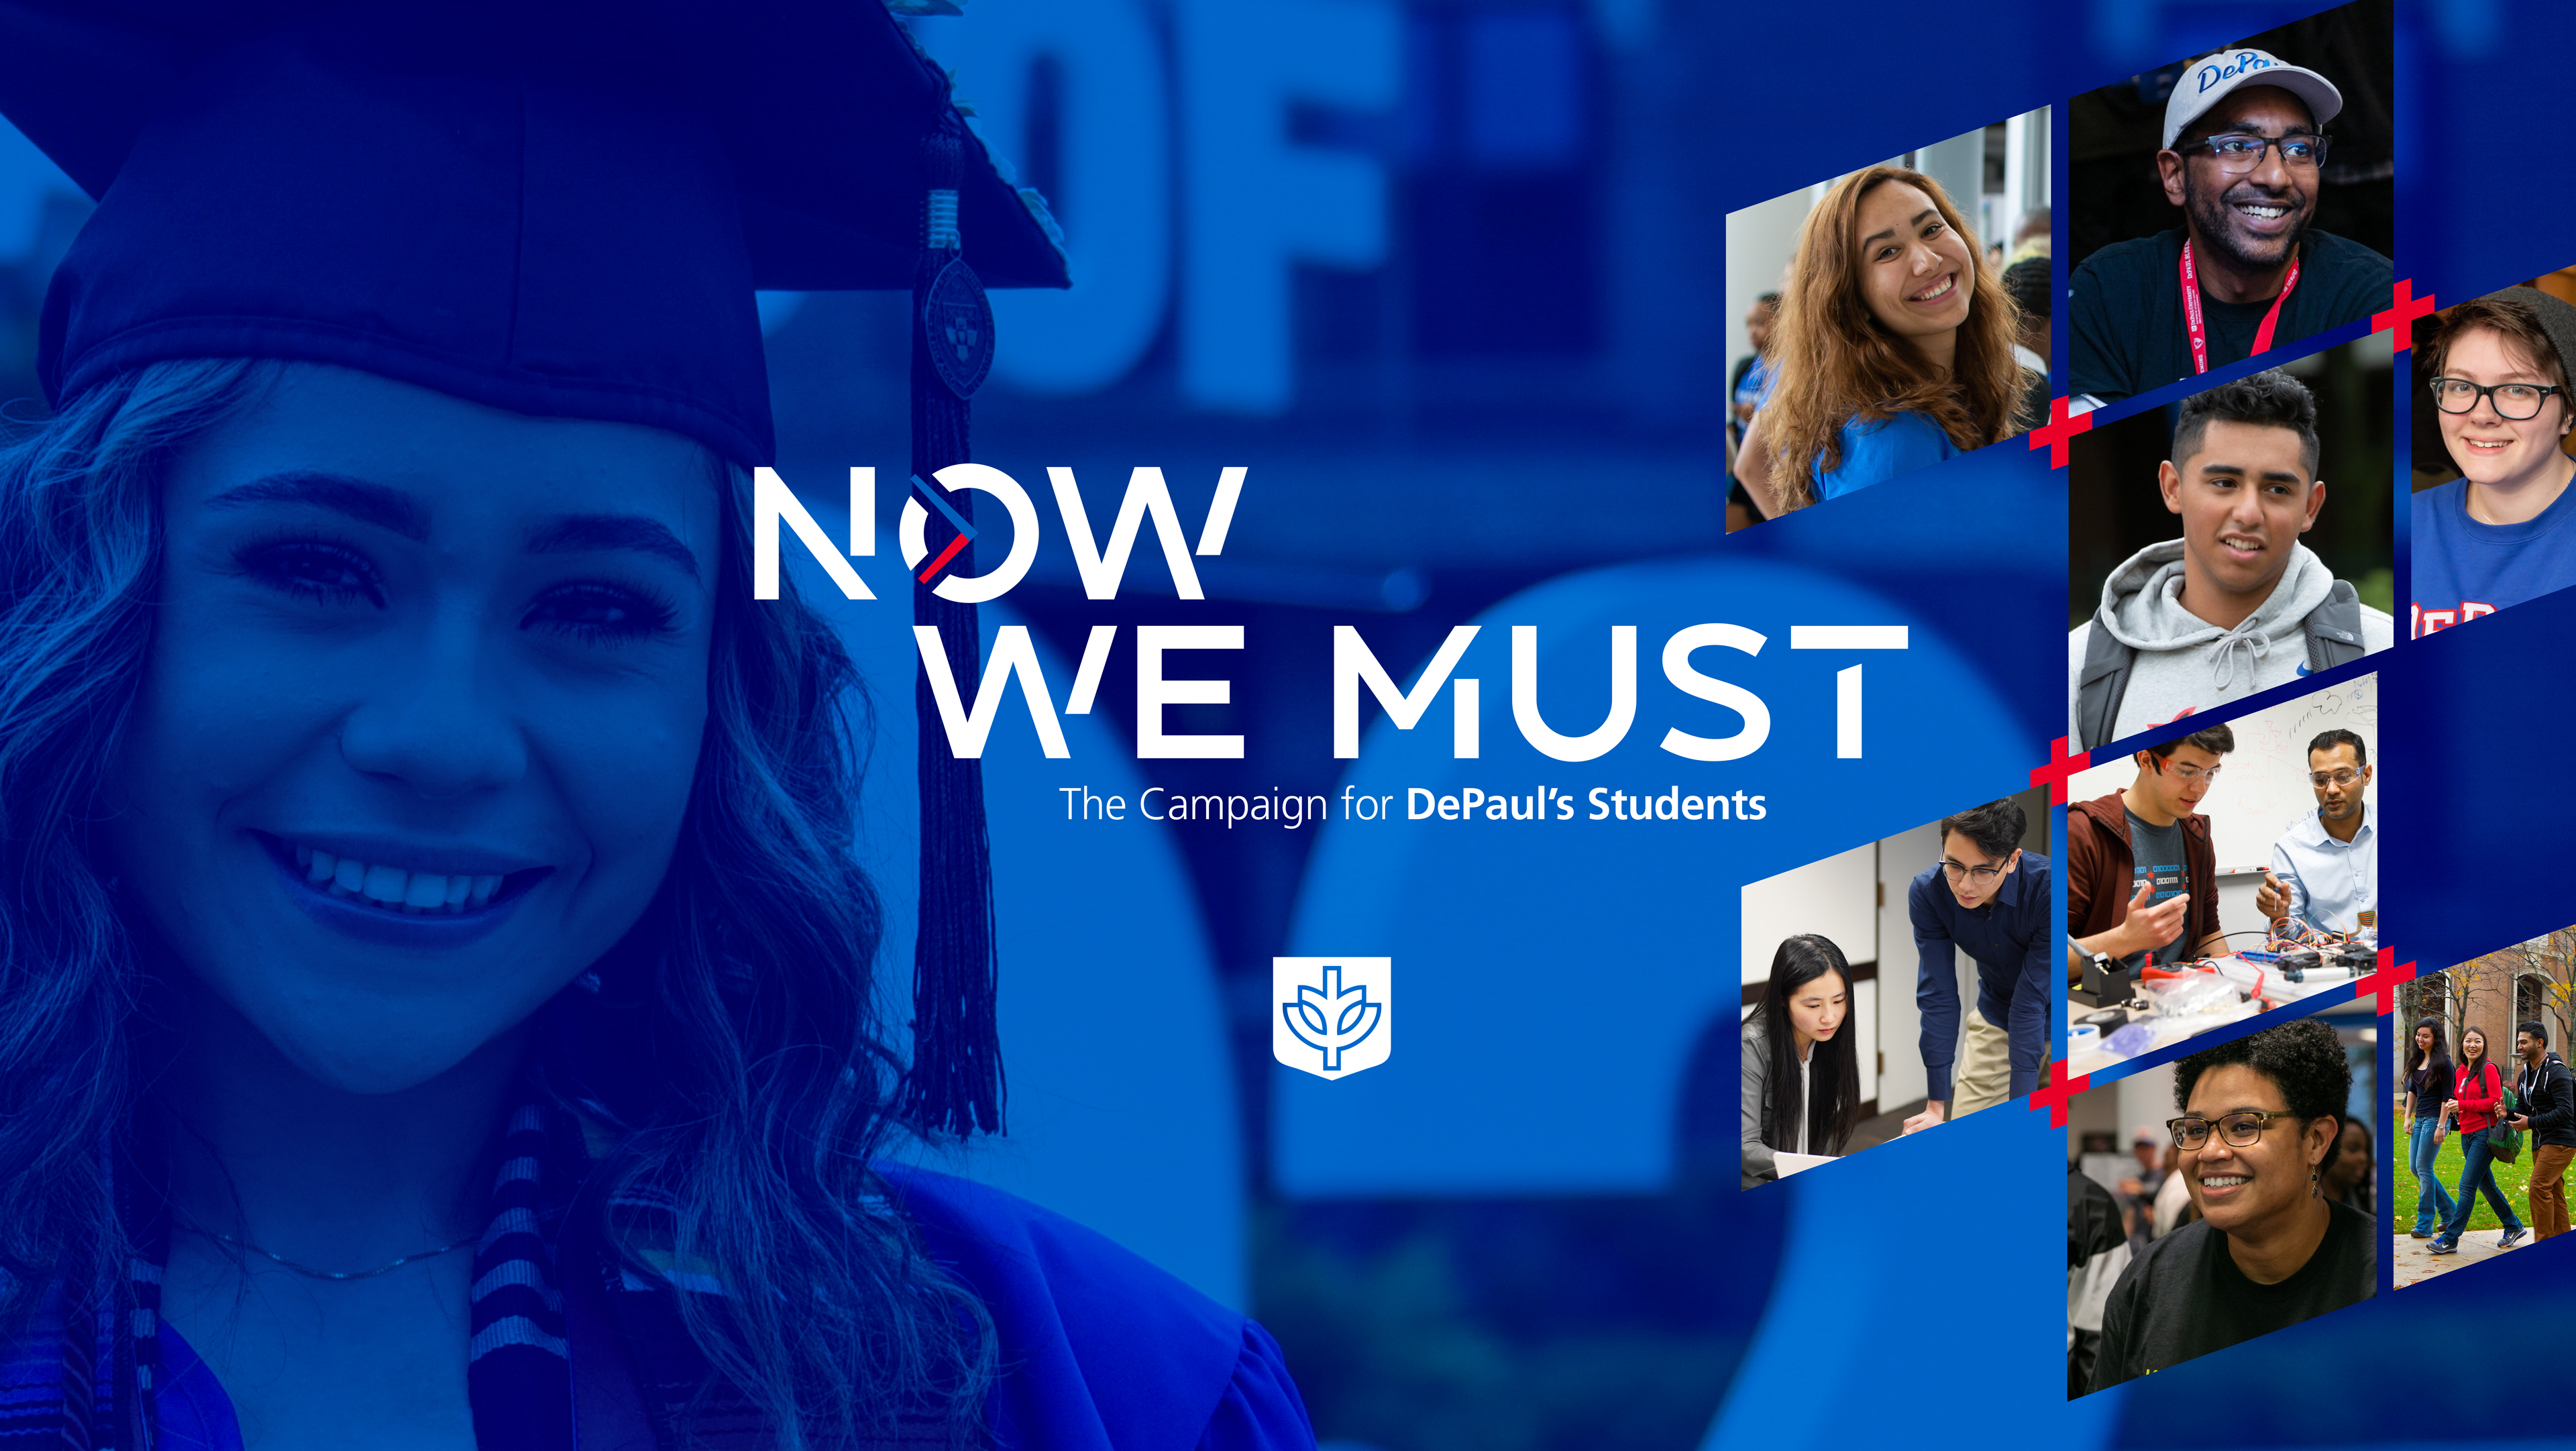 Now We Must: The Campaign for DePaul’s Students closes with $125 million raised